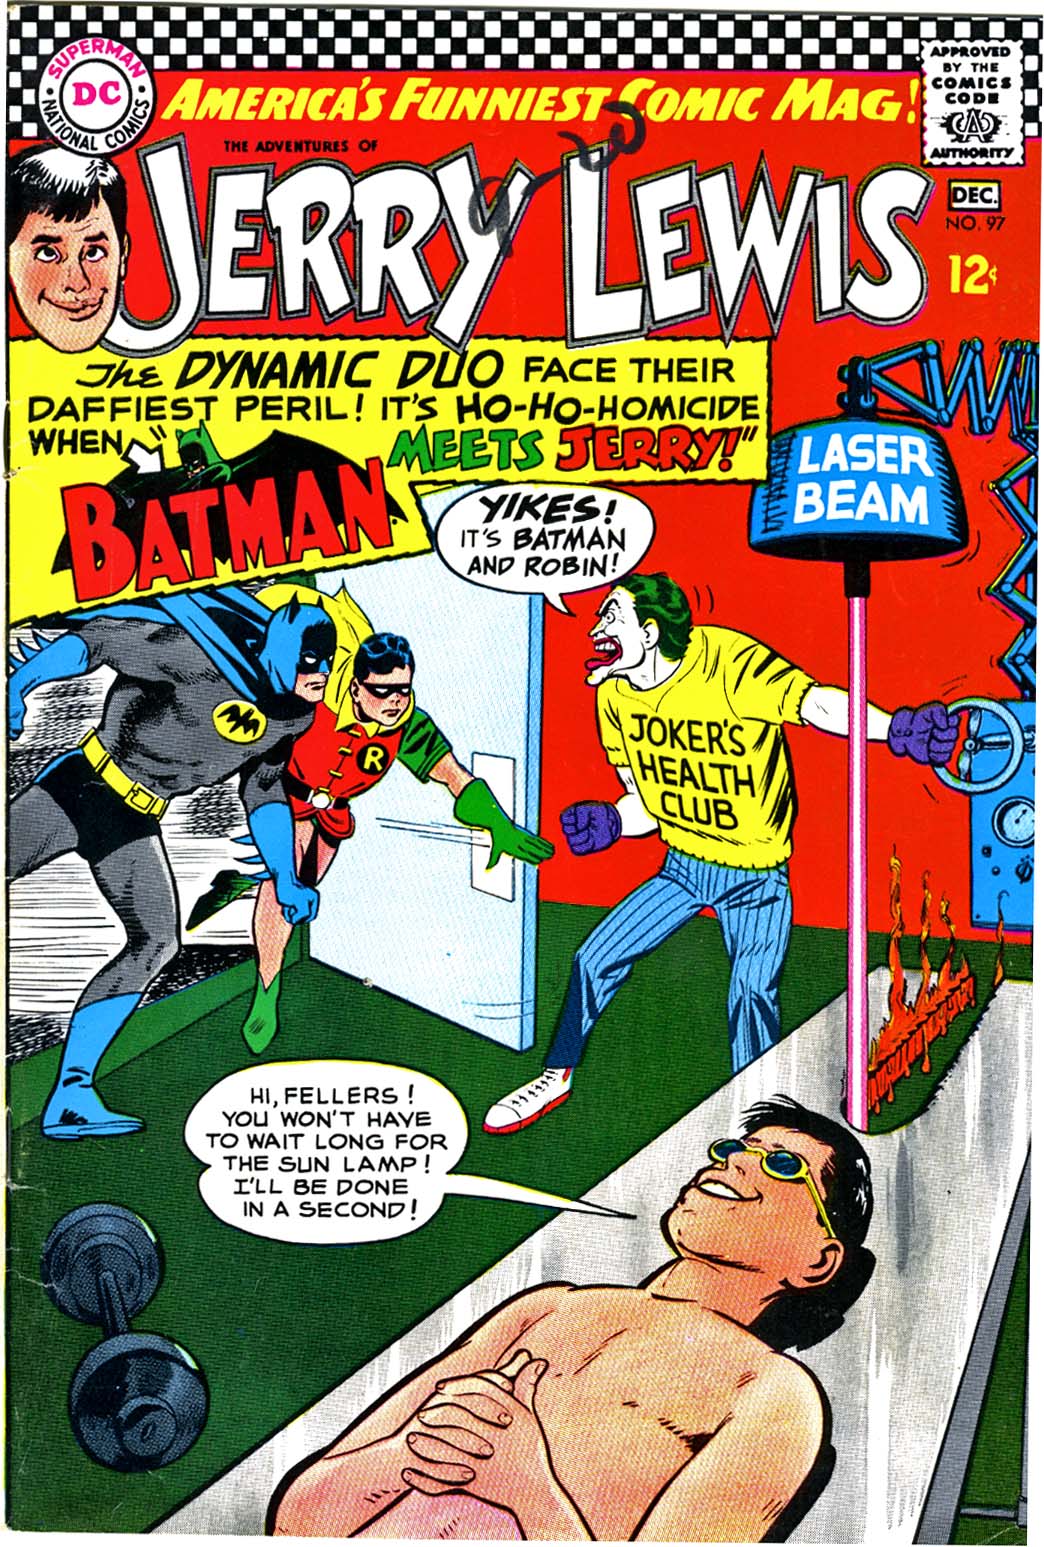 Read online The Adventures of Jerry Lewis comic -  Issue #97 - 1